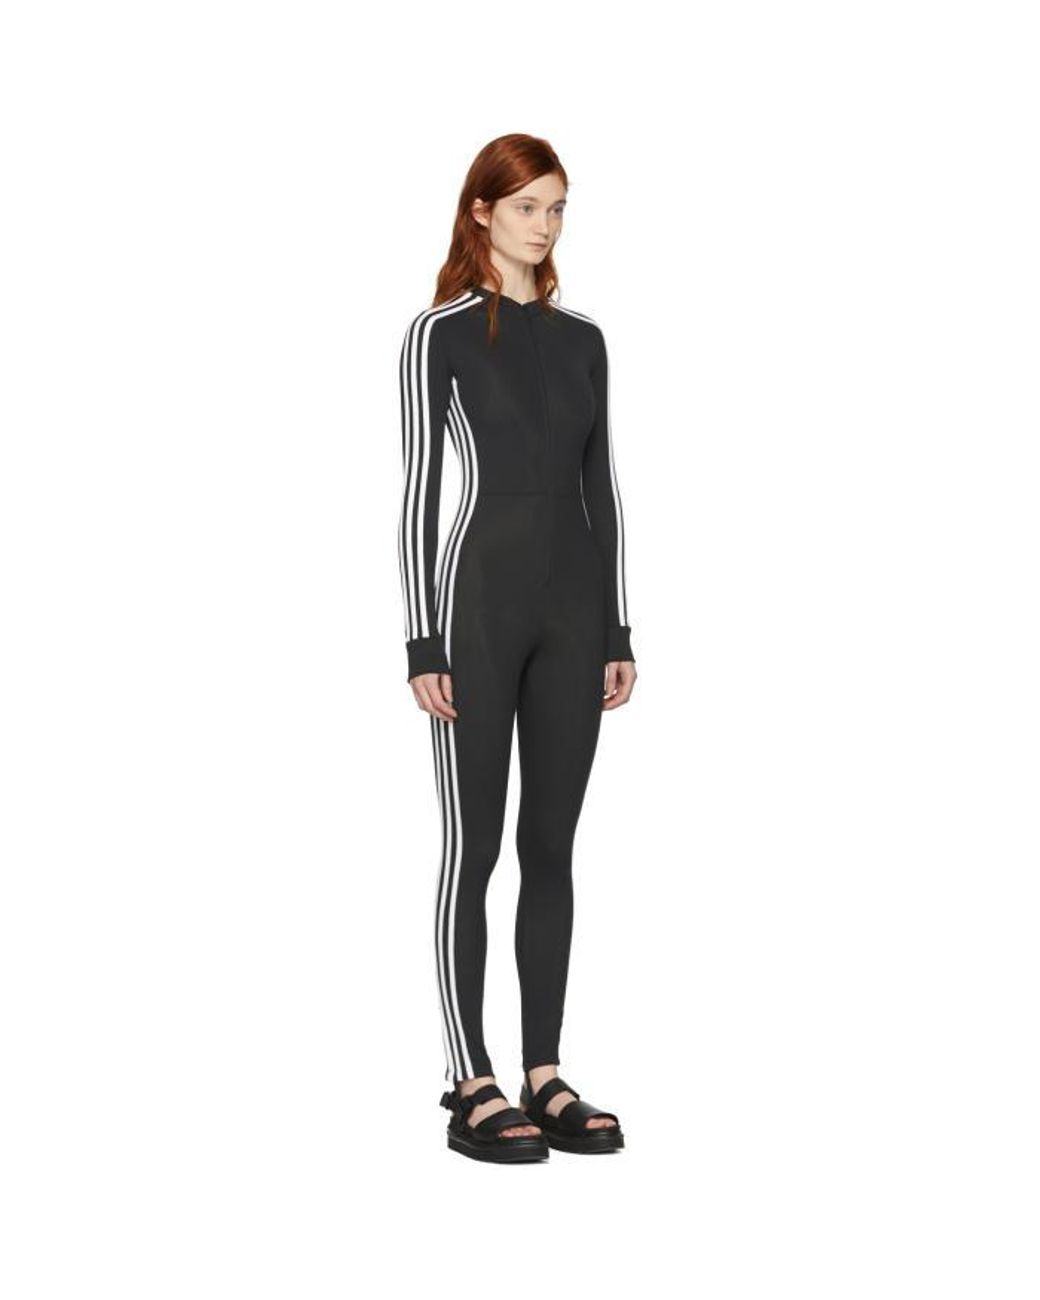 Discover more than 81 adidas stage jumpsuit - ceg.edu.vn